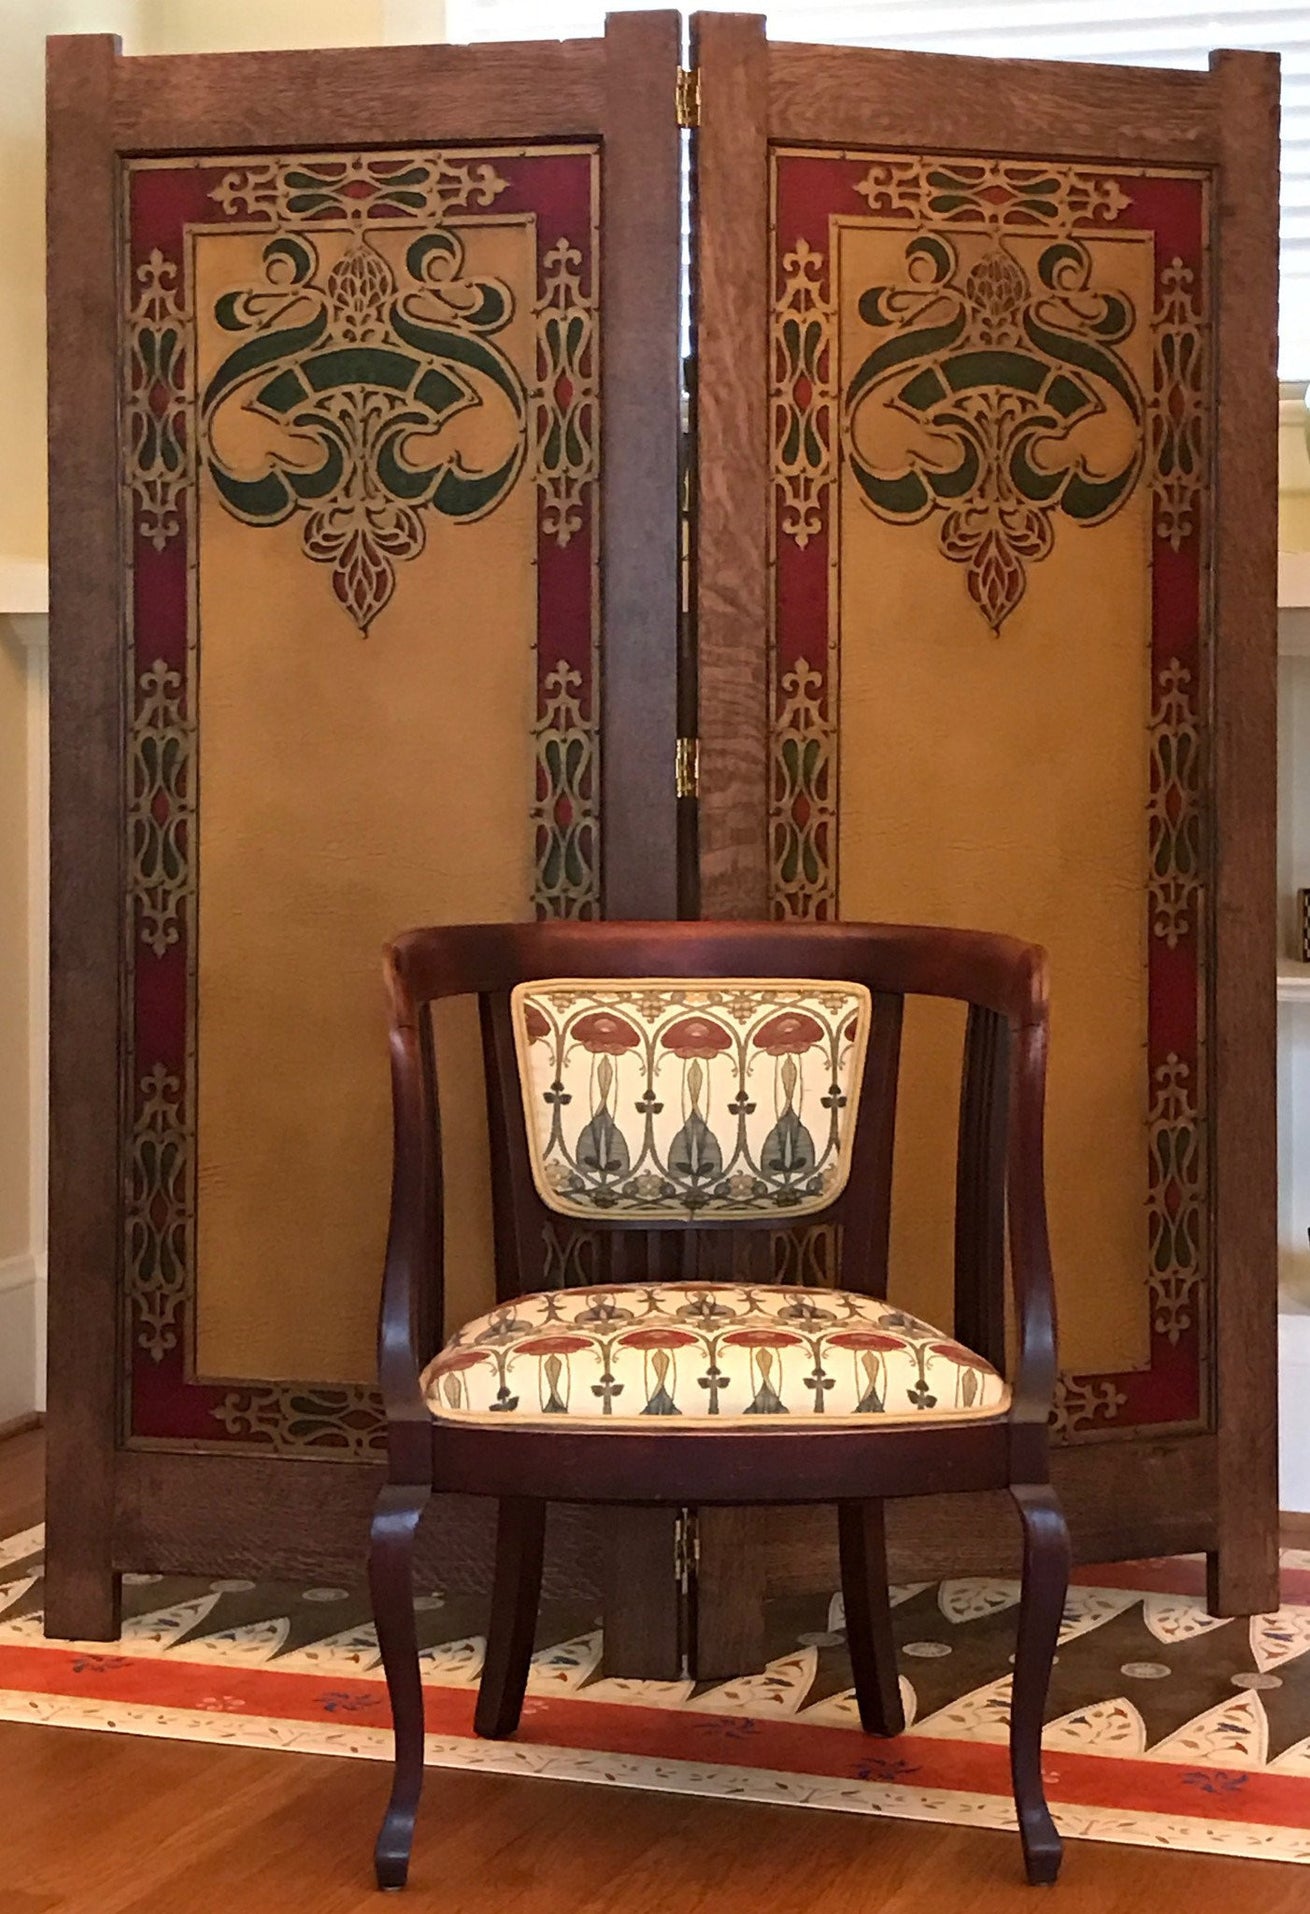 New Arts & Crafts Folding Screen with Antique Wallpaper Panels - Hand-Printed Medieval "Leather" Paper